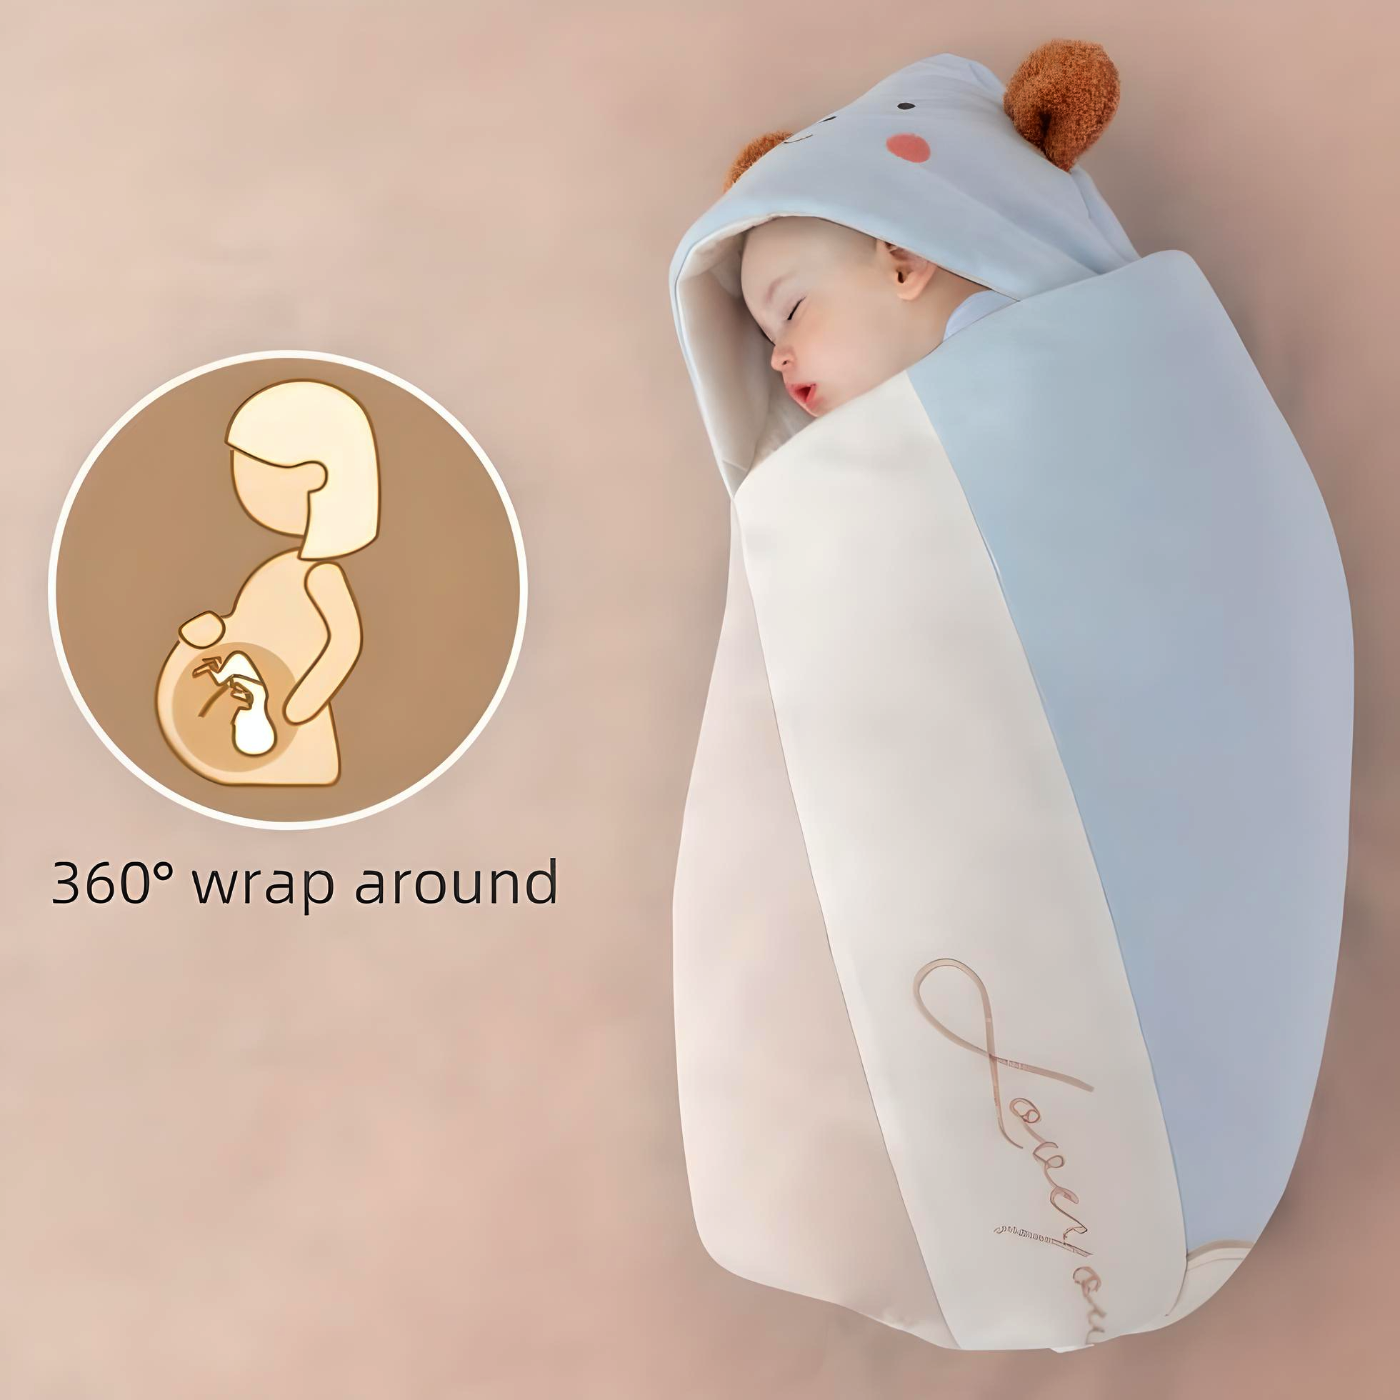 Minikin Premium Quilted Receiving Blanket I Swaddle Blanket with Hood I NB-6Months